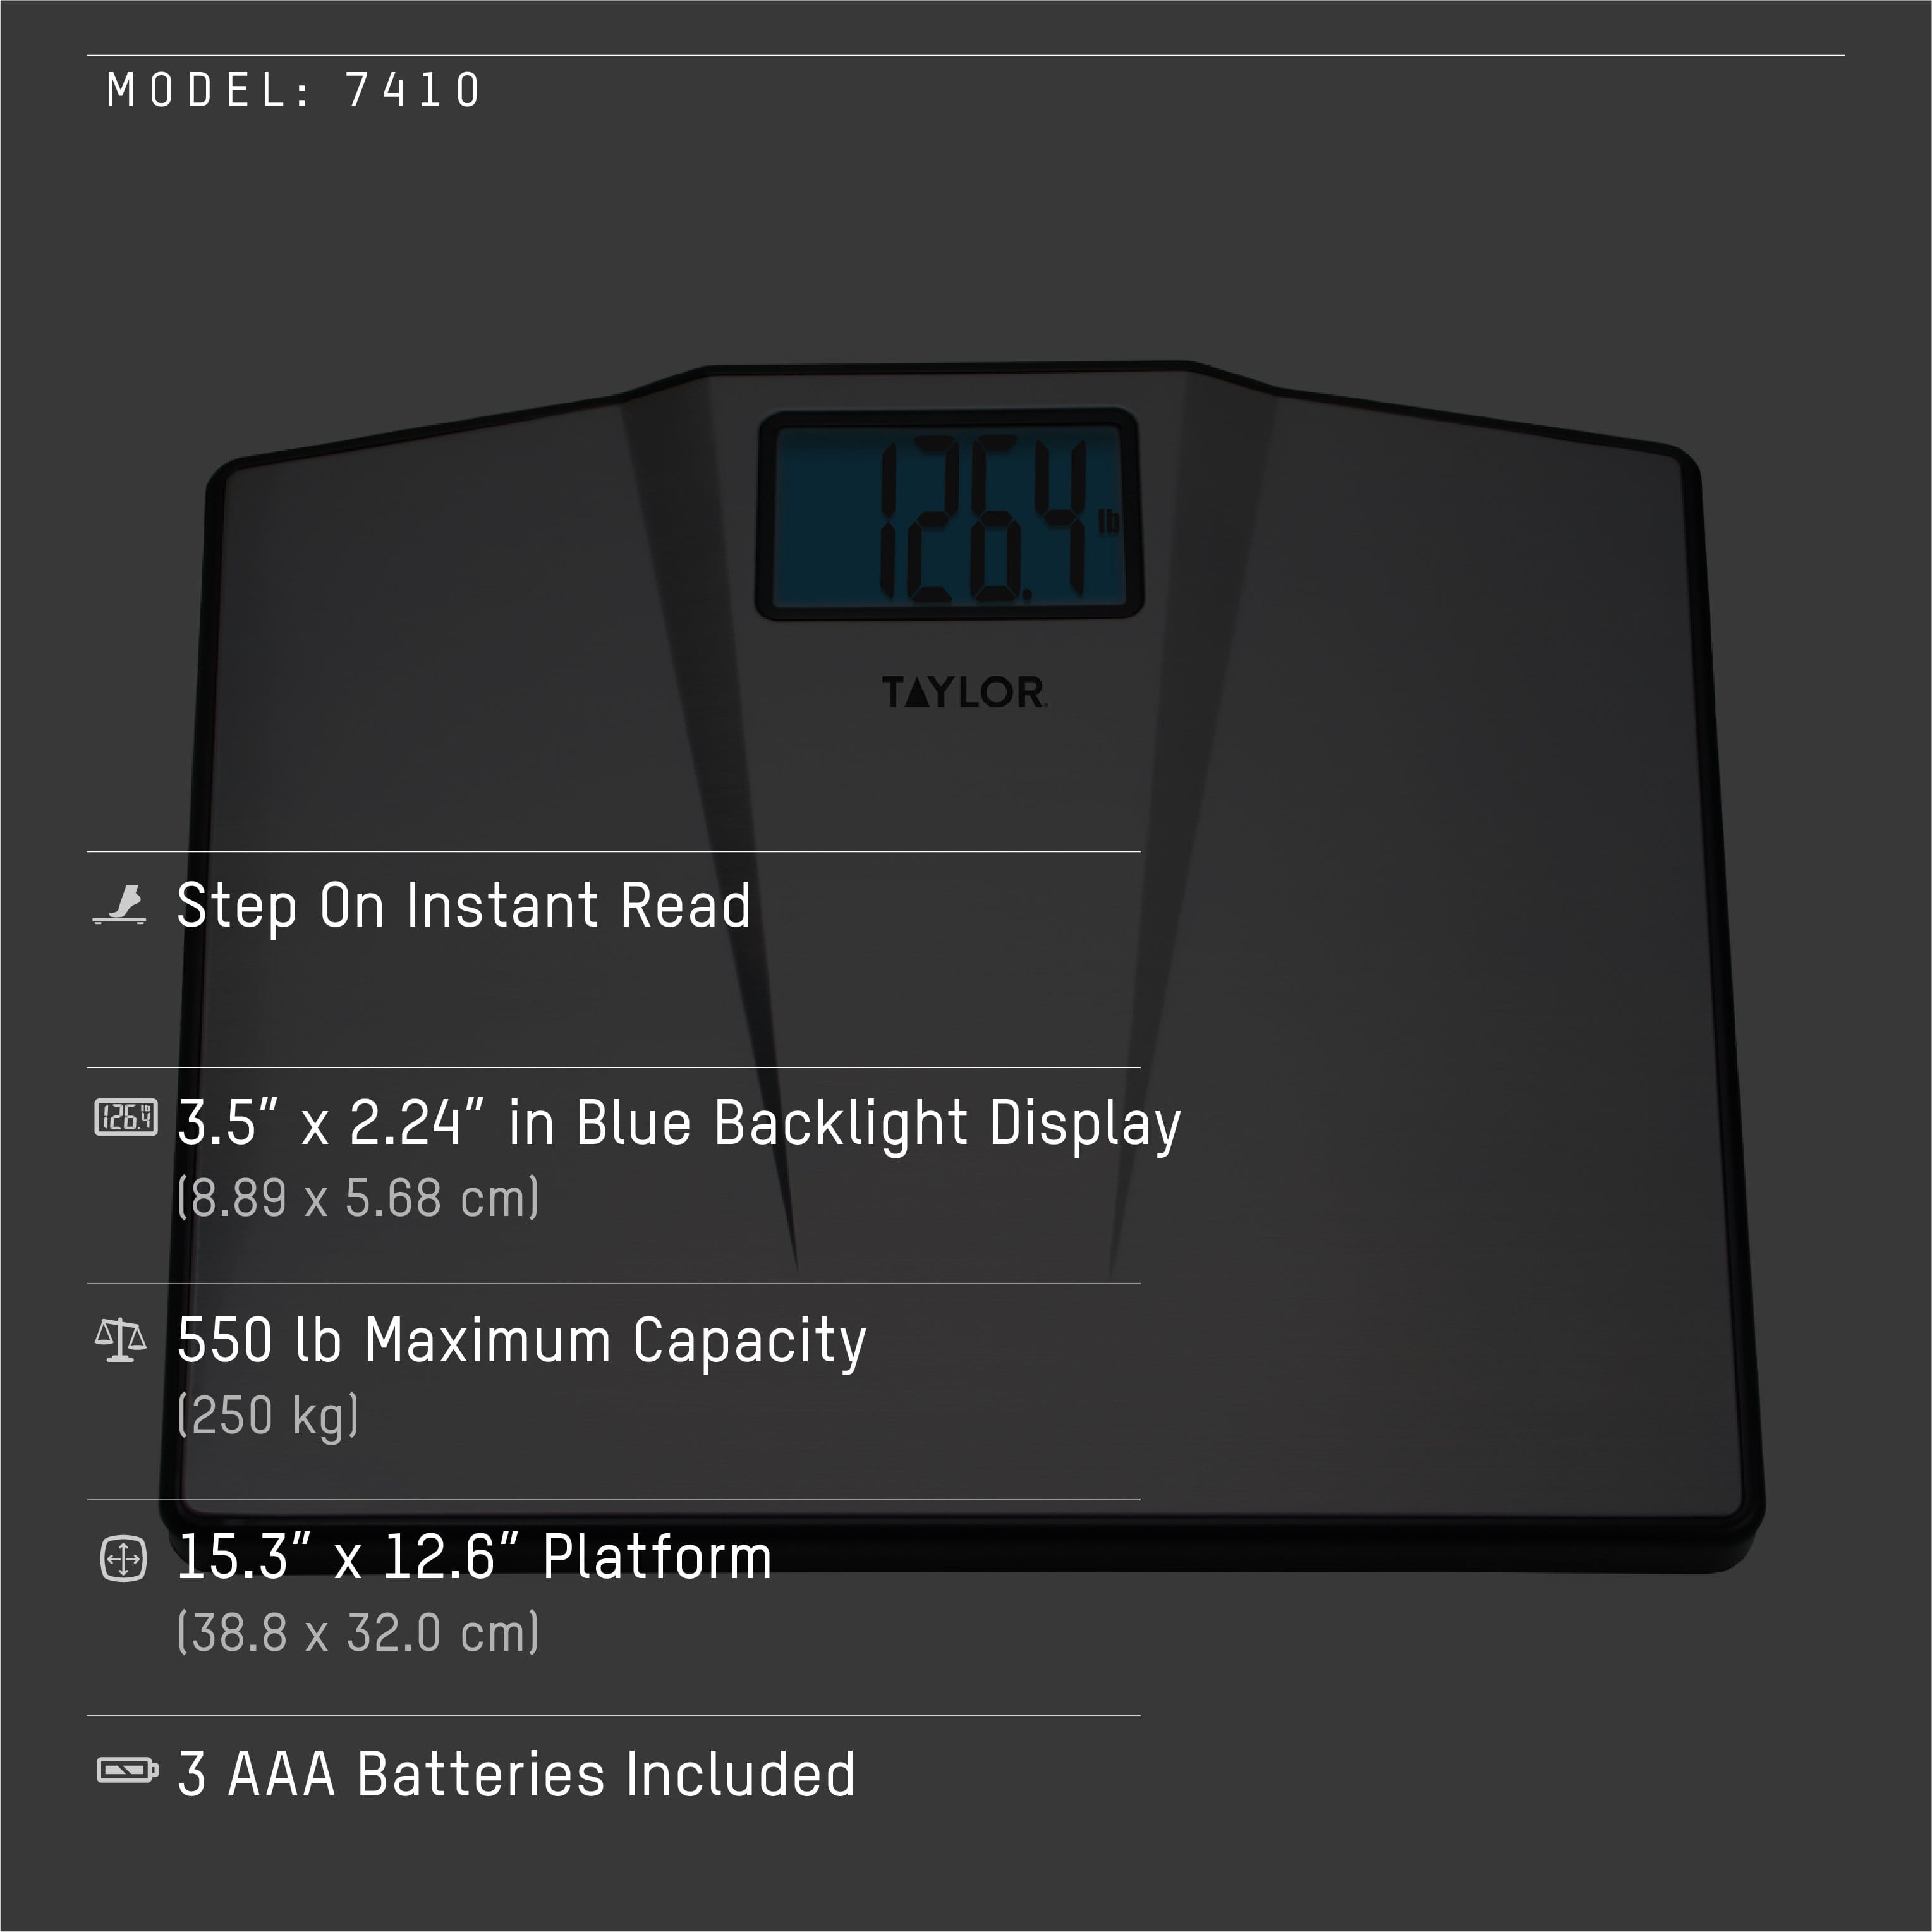 Beautural Bathroom Scale Precision Digital Body Weight Lighted Display  400lb Max for sale online